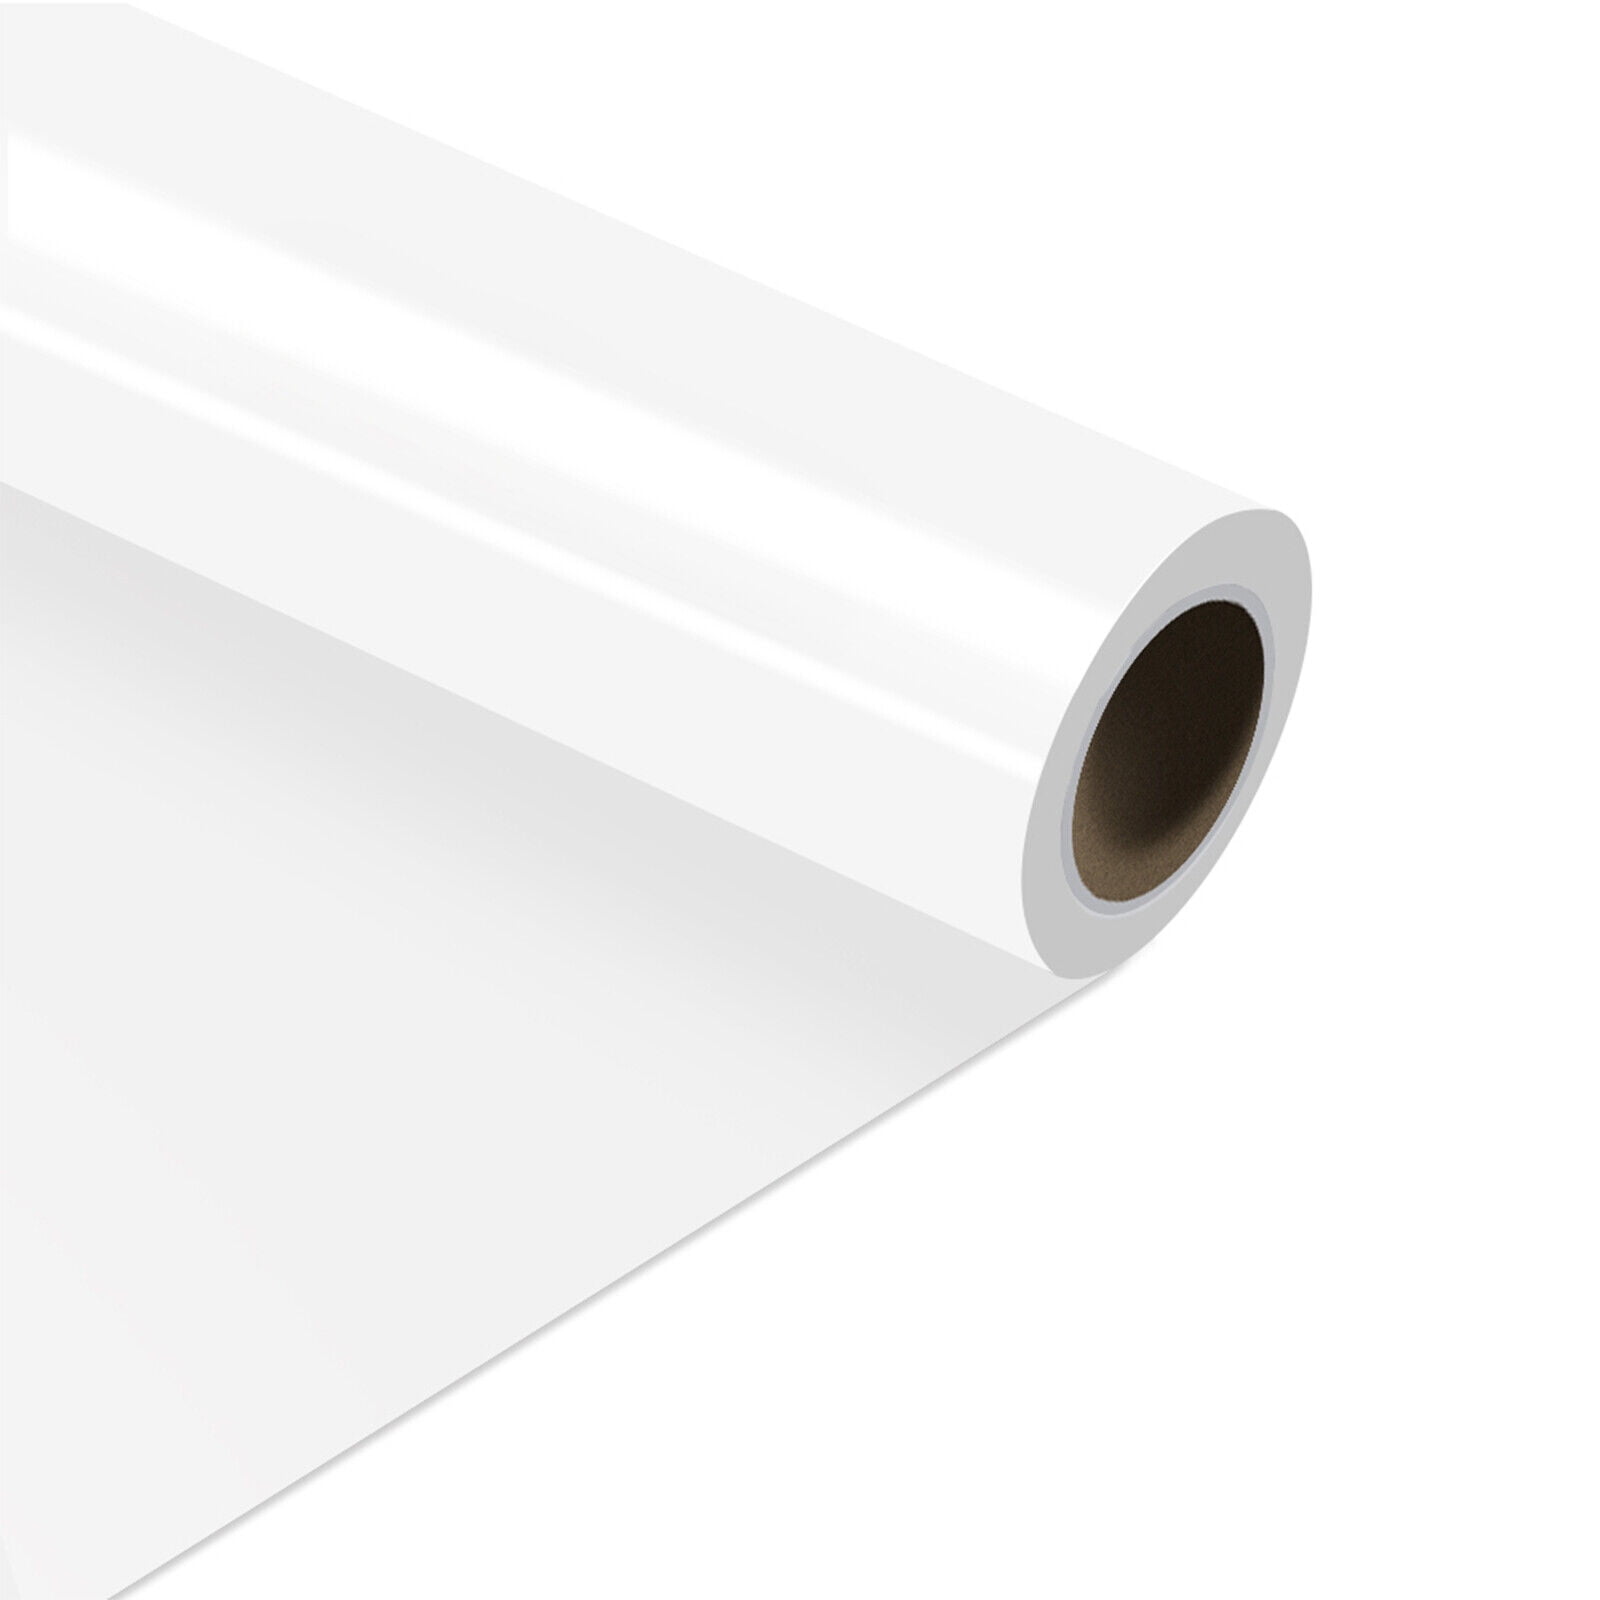 HTVRONT 12 inch x 30ft Heat Transfer Vinyl White HTV Rolls for T-Shirts, Iron on for Cricut, Size: 12 x 30ft